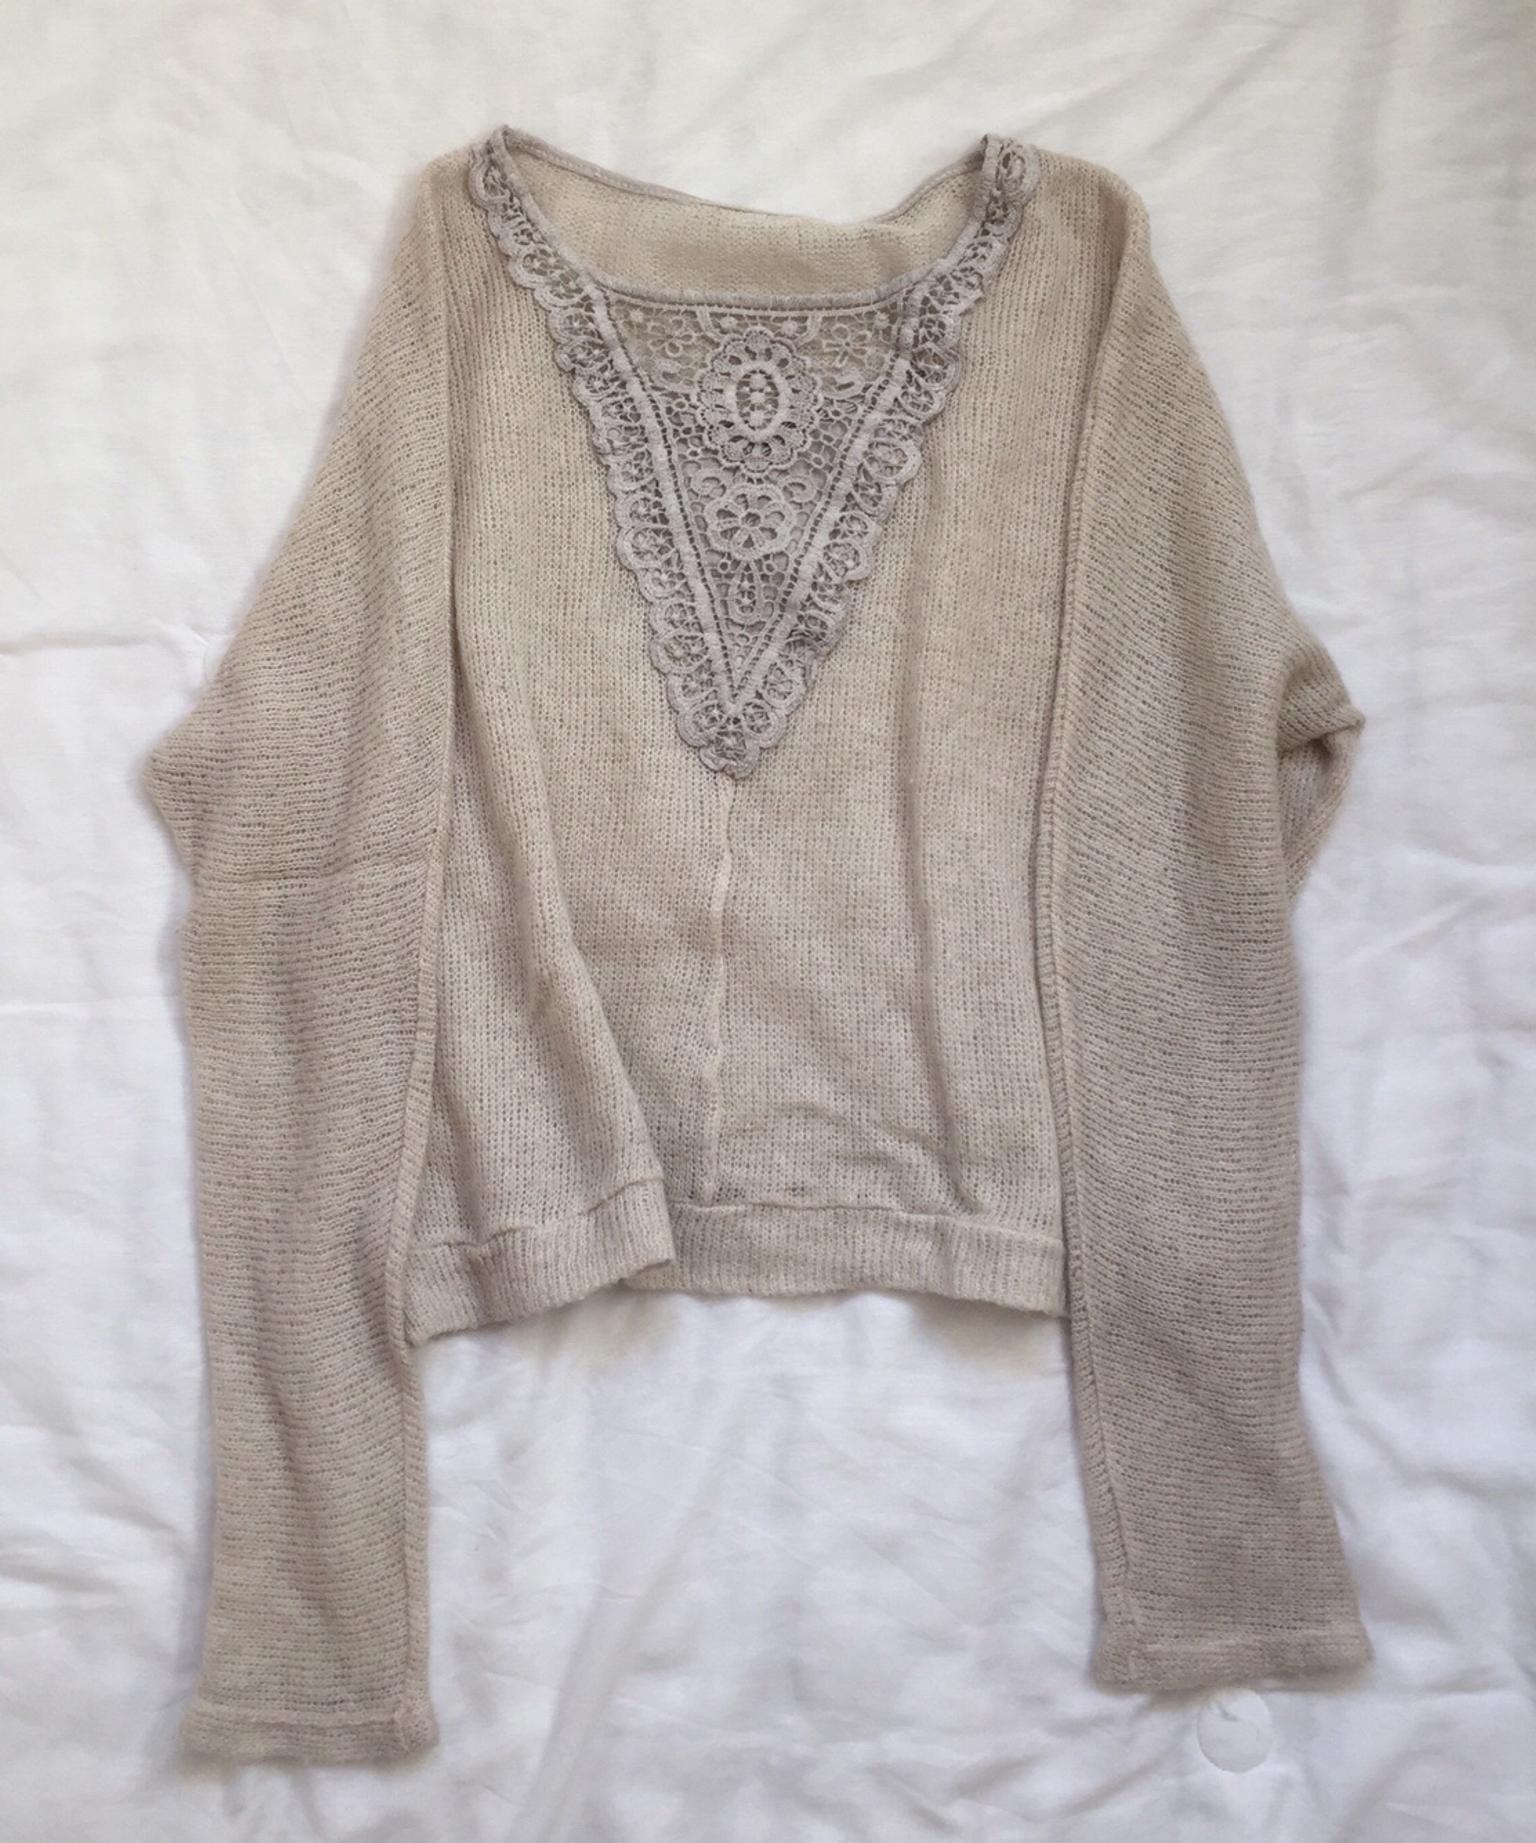 Top Beige in 81375 München for €3.00 for sale | Shpock